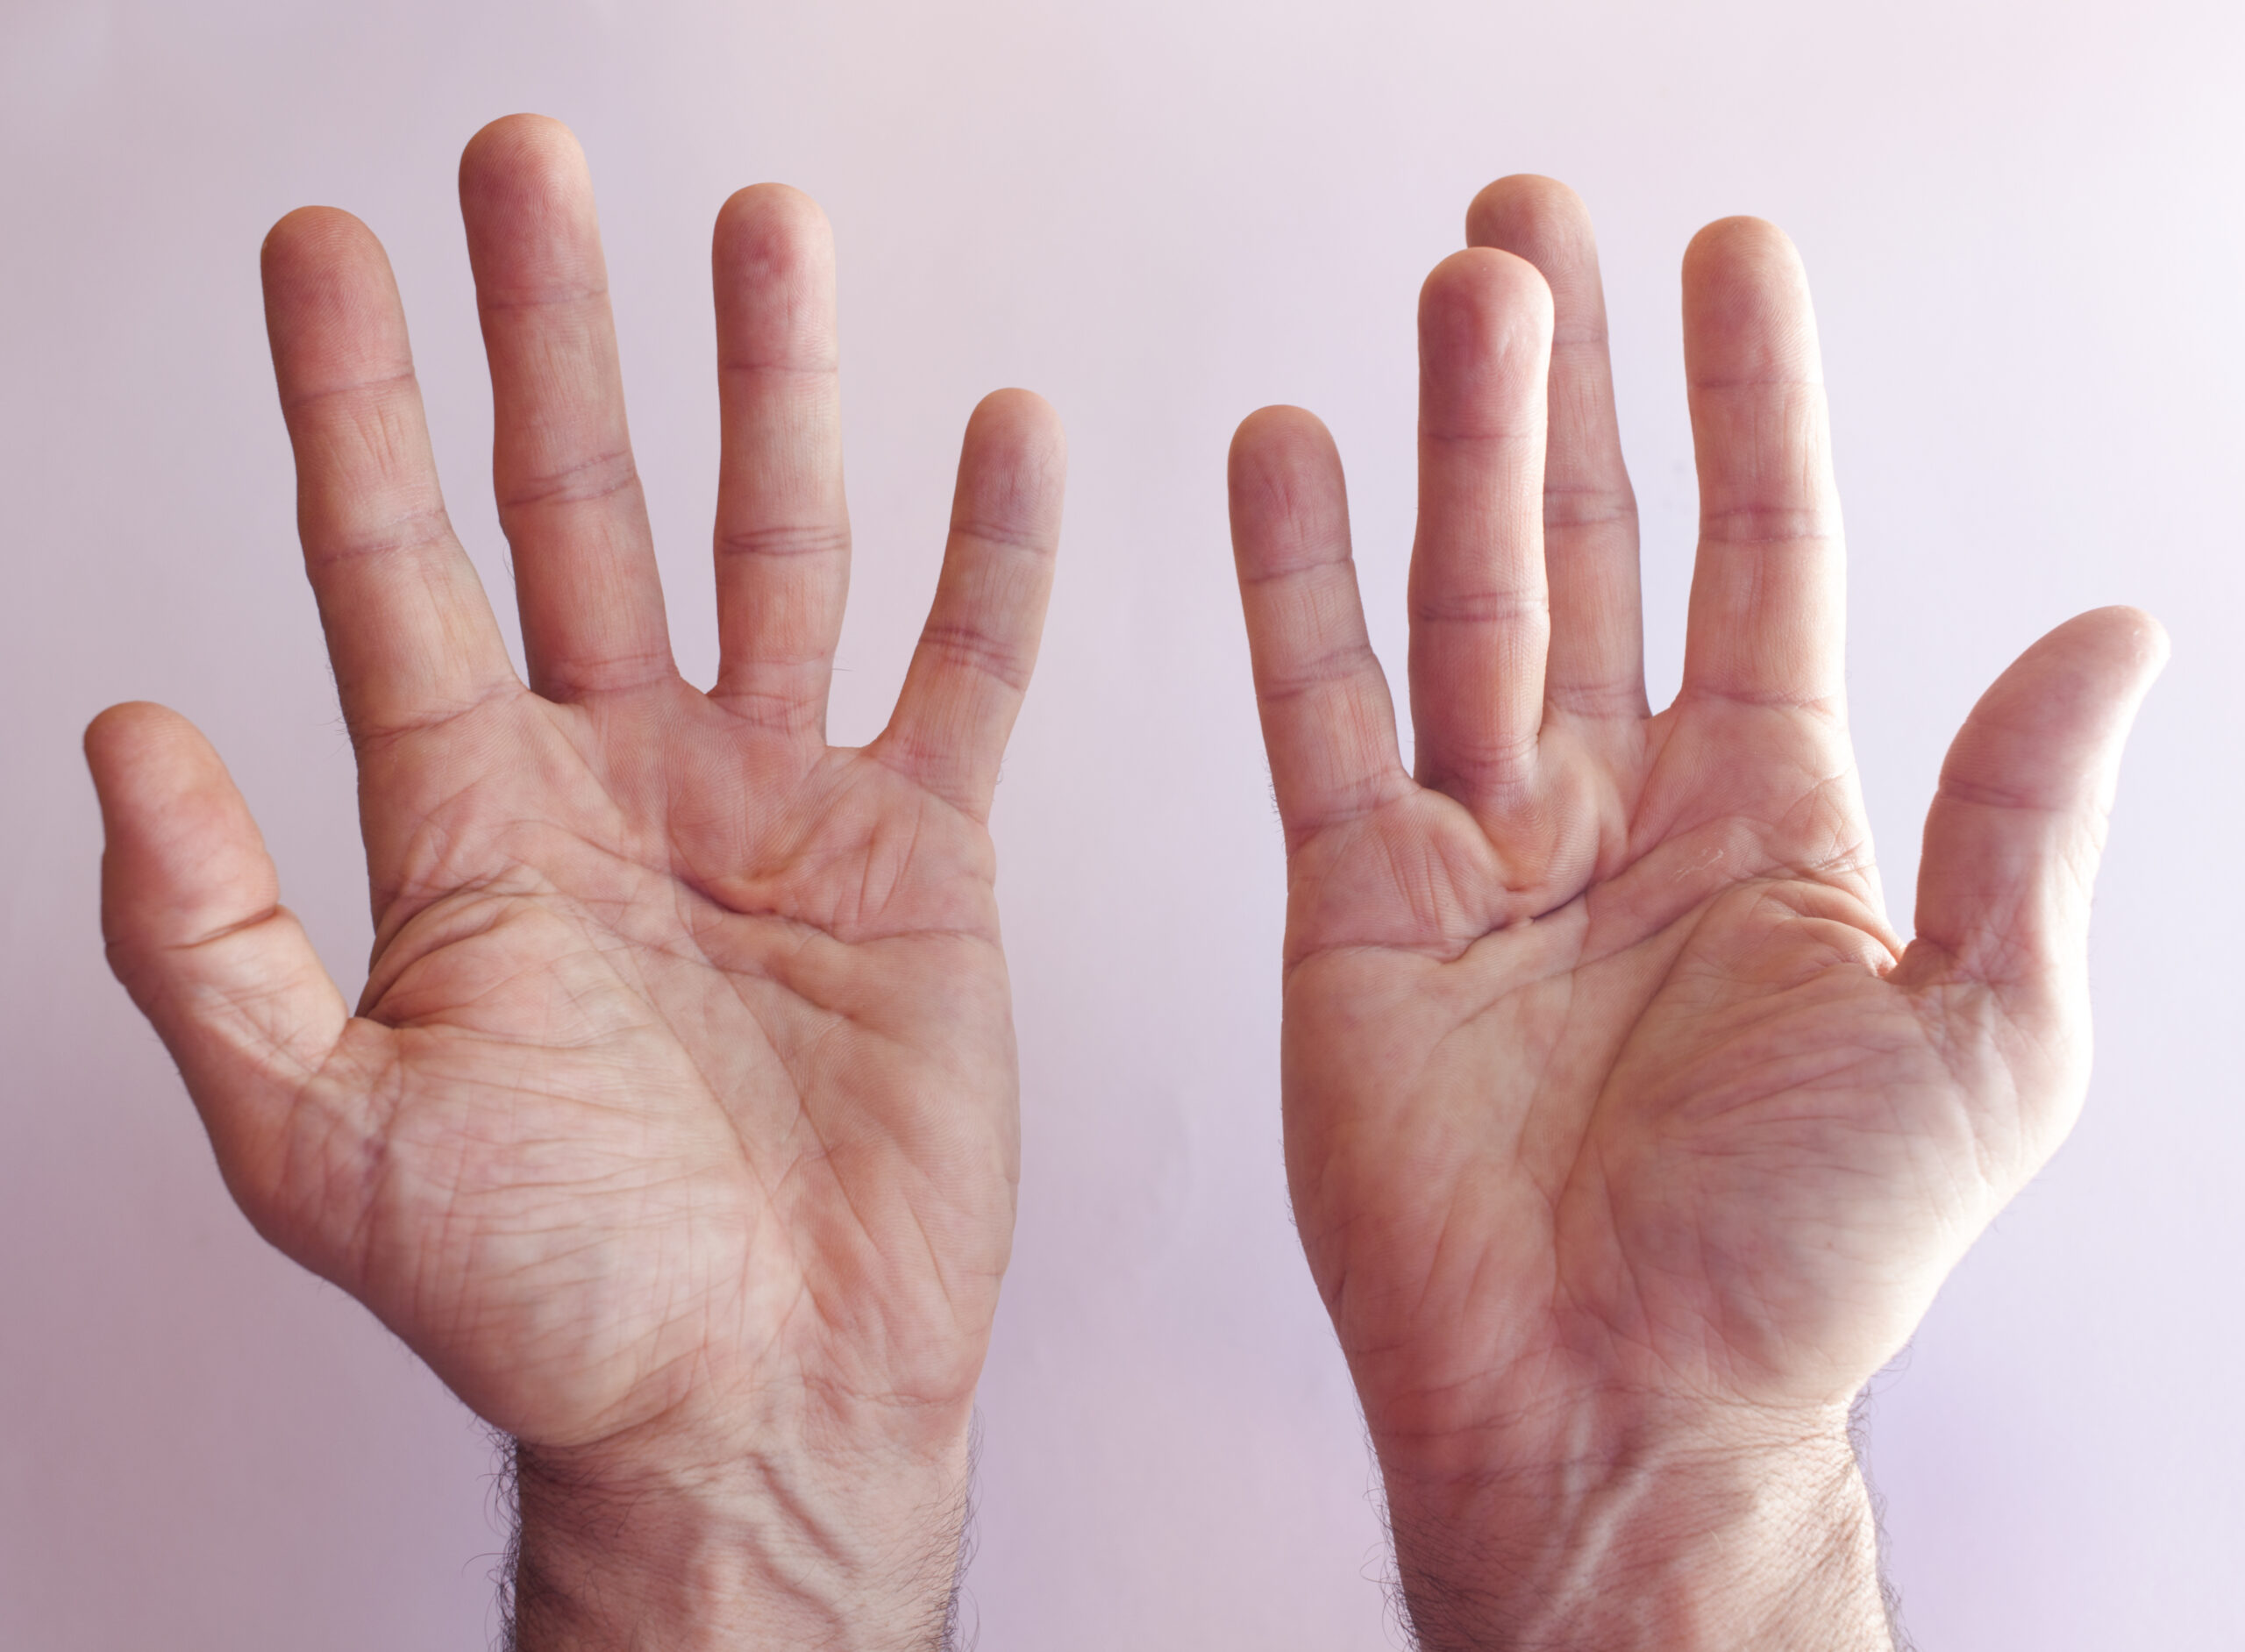 hands showing dupuytrens